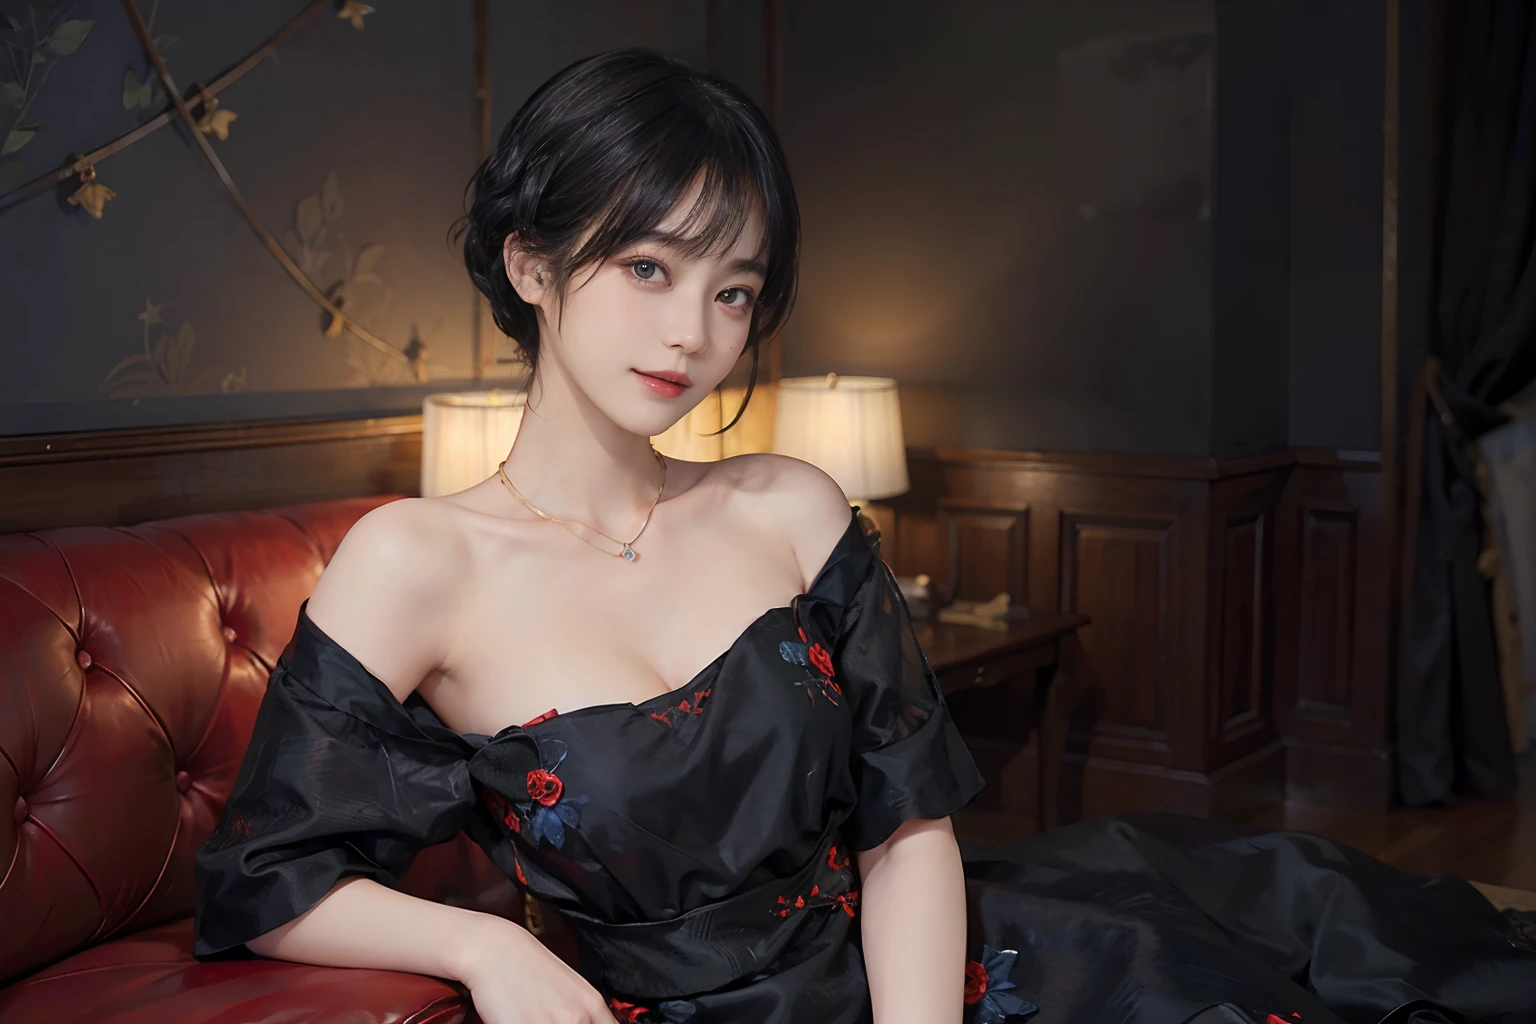 ((1womanl)),  (((Black Shorthair))), （masuter piece：1,3）、top-quality、​masterpiece、hight resolution、Original、highly detailed wallpaper、dress code、Luxurious necklace, (A slight smil)、a small face、((Breast))、(Red and blue dress)、(Light on Face)、Live-action style, Beautiful facial features, darkened room, ((Hu Dilan))